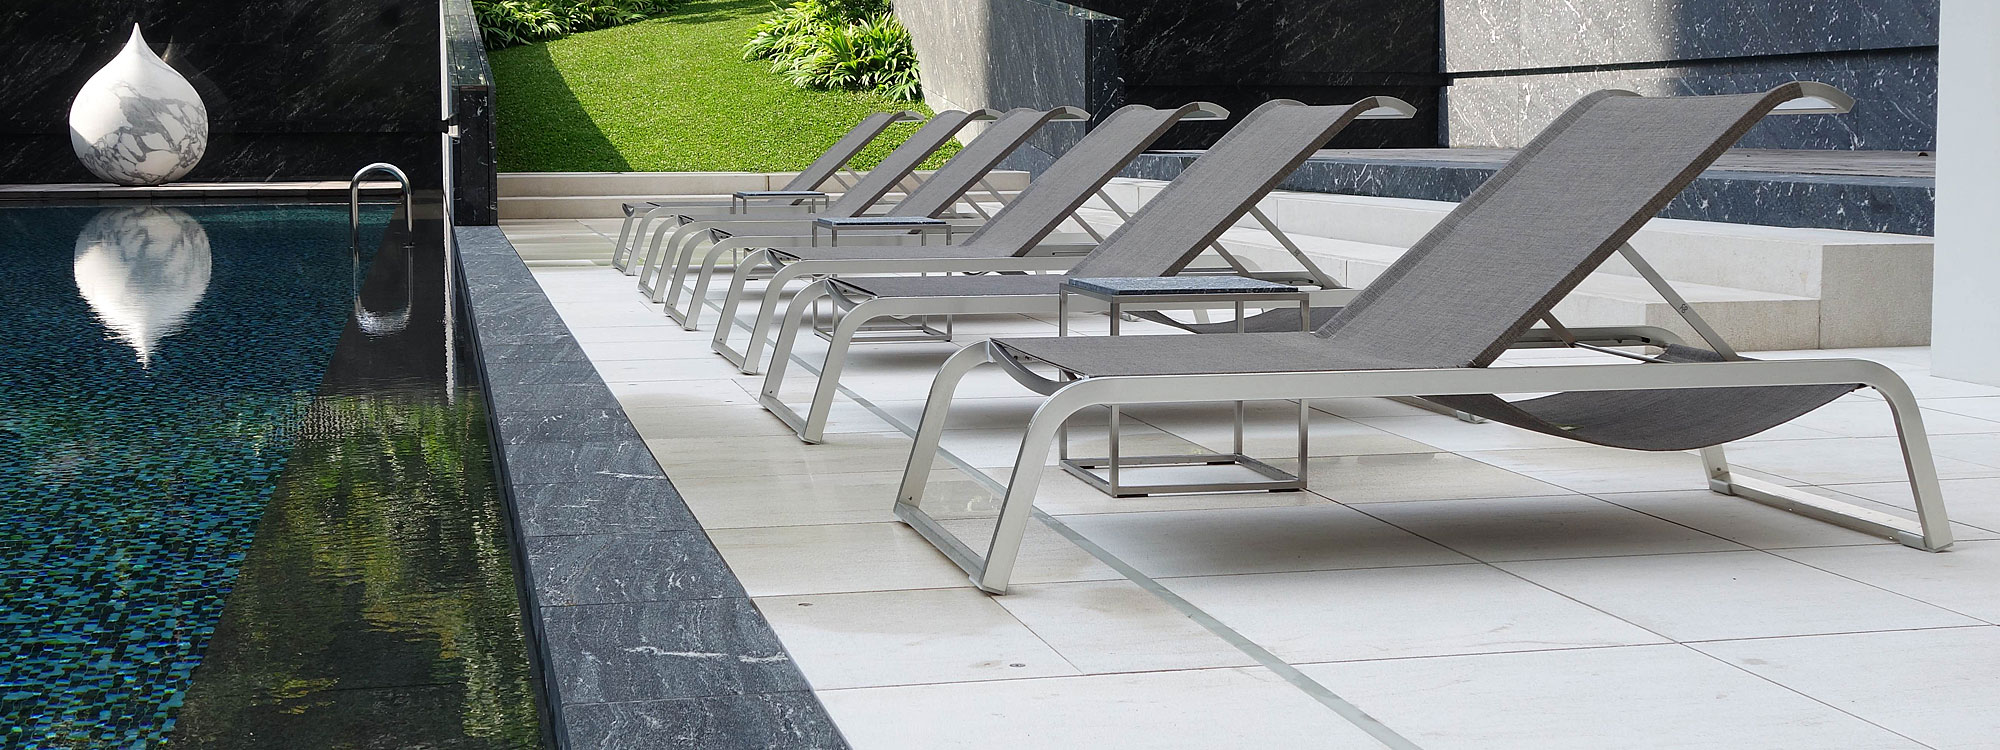 Image of row of L3 sun loungers along poolside